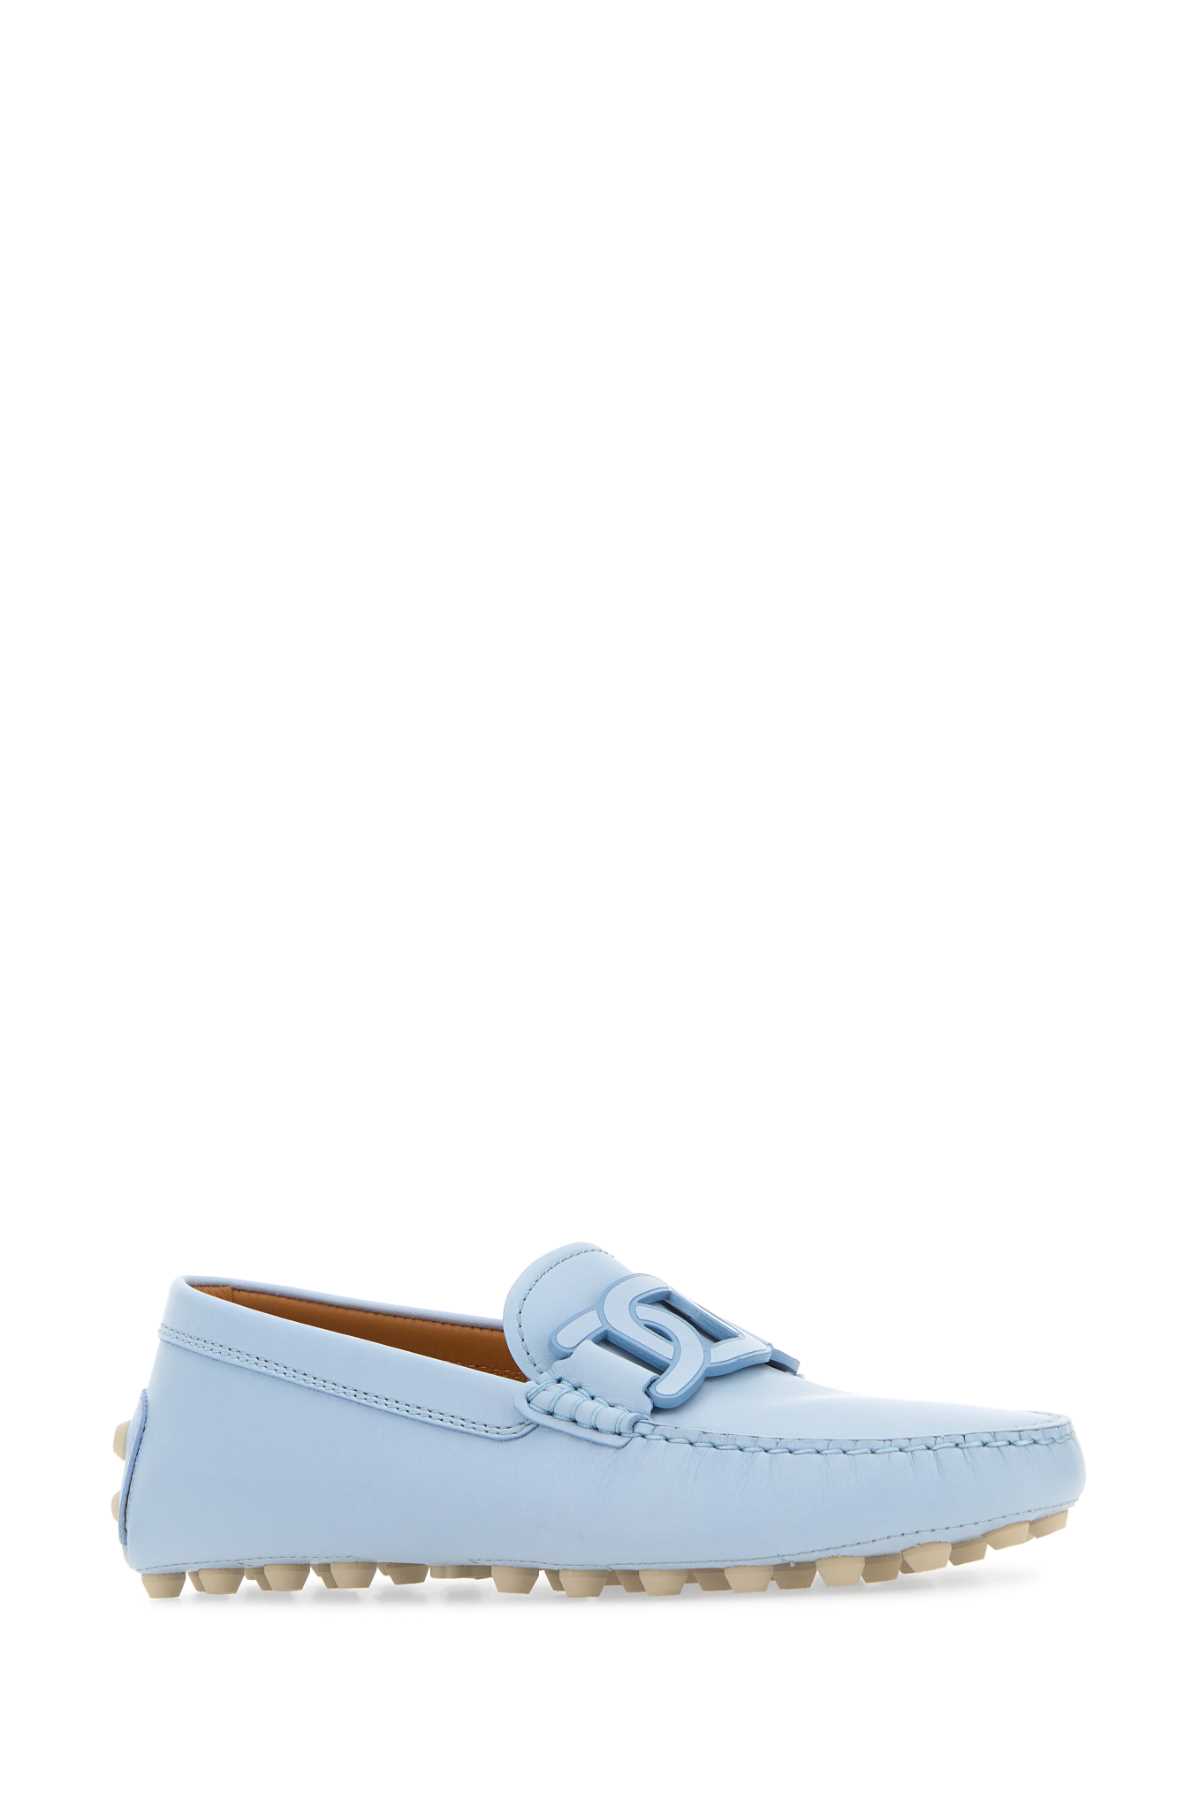 TOD'S LIGHT BLUE LEATHER LOAFERS